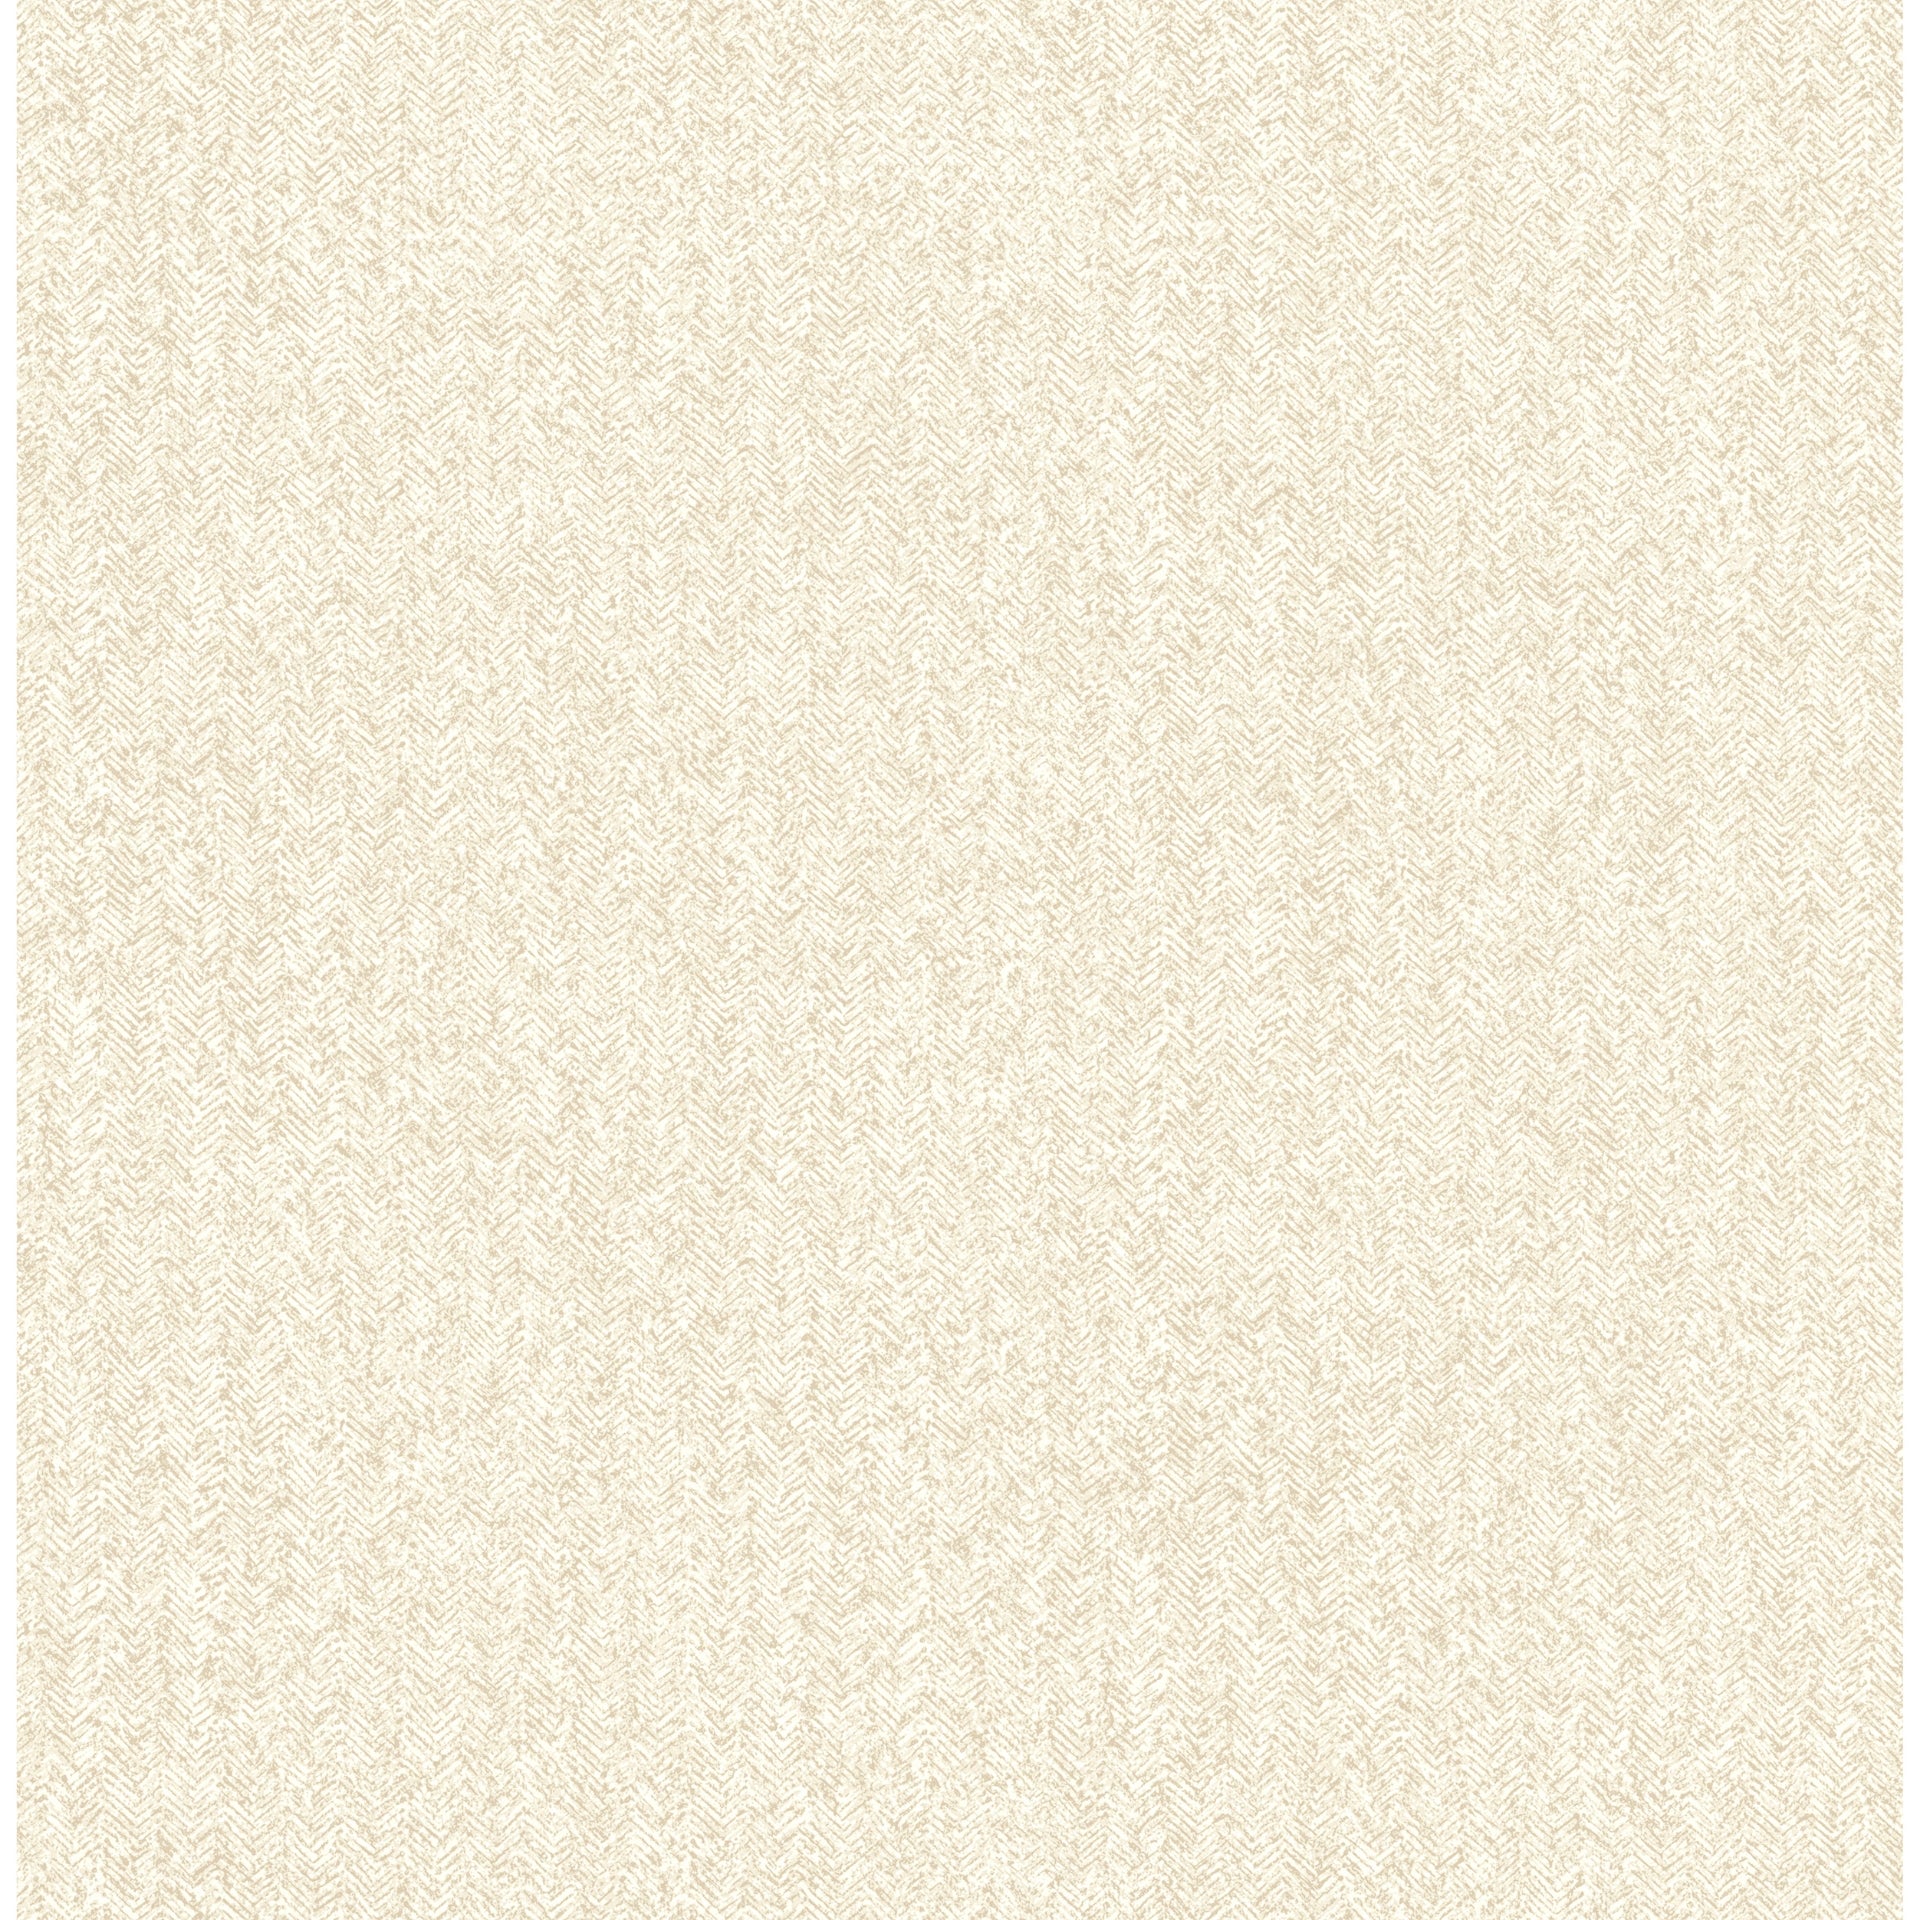 Picture of Ashbee Taupe Faux Tweed Wallpaper